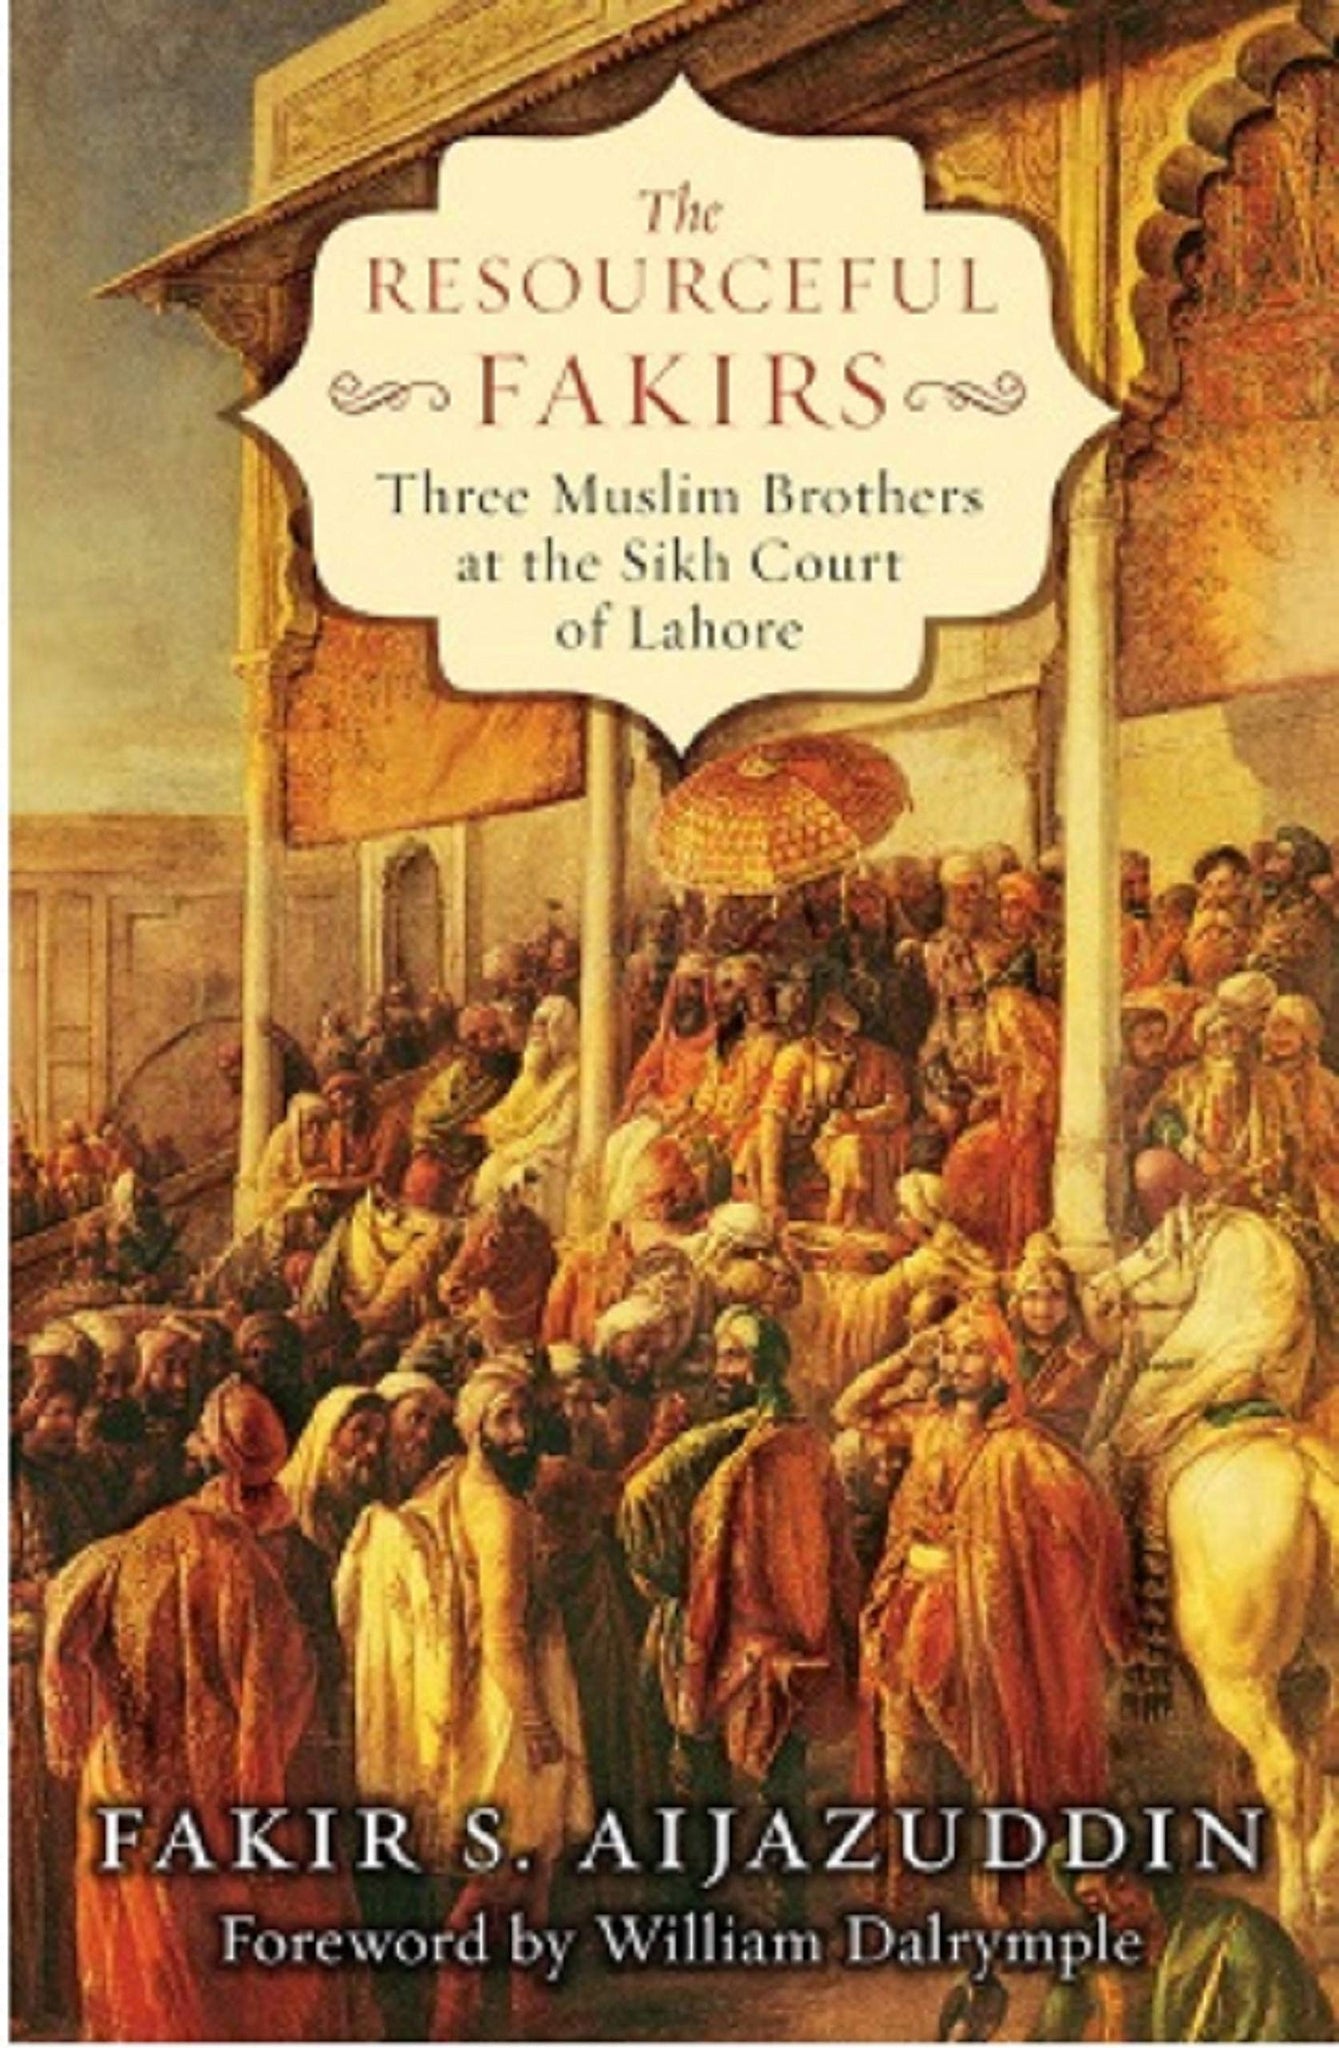 The Resourceful Fakirs: Three Muslim Brothers At The Sikh Court Of Lahore